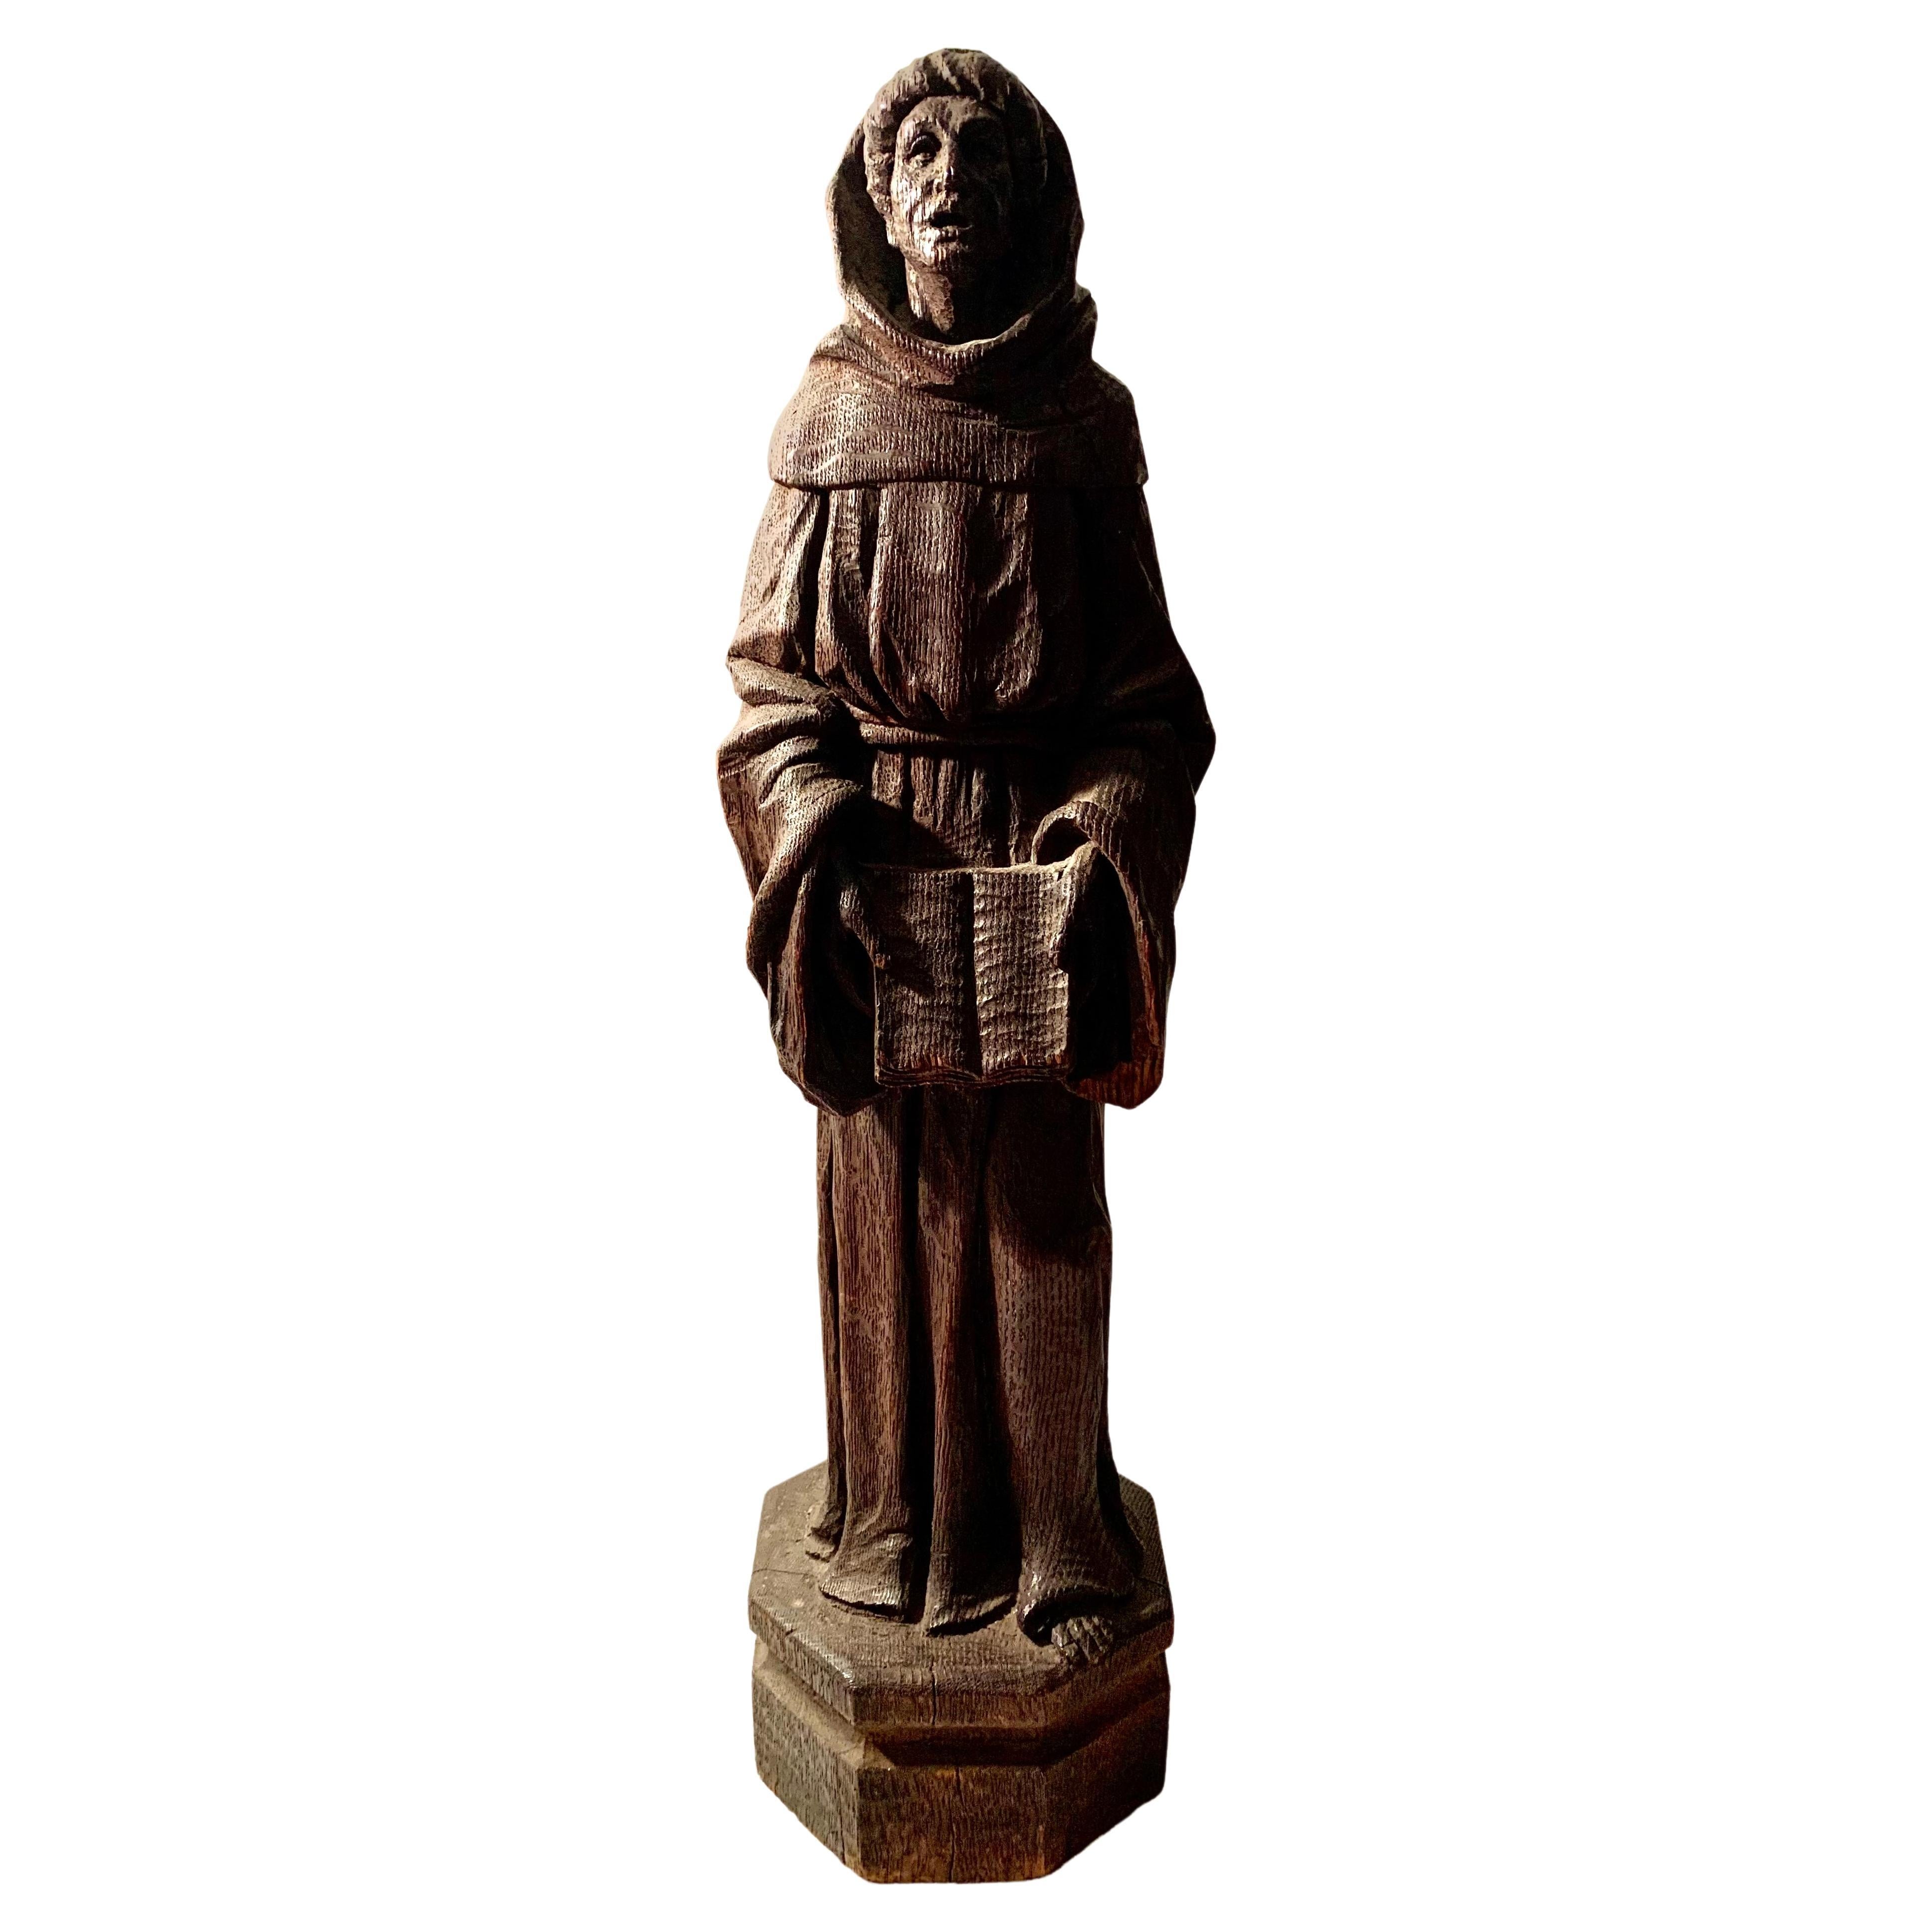 Antique Large Carved Oak Figure of Saint Anthony of Padua, 18th-19th Century